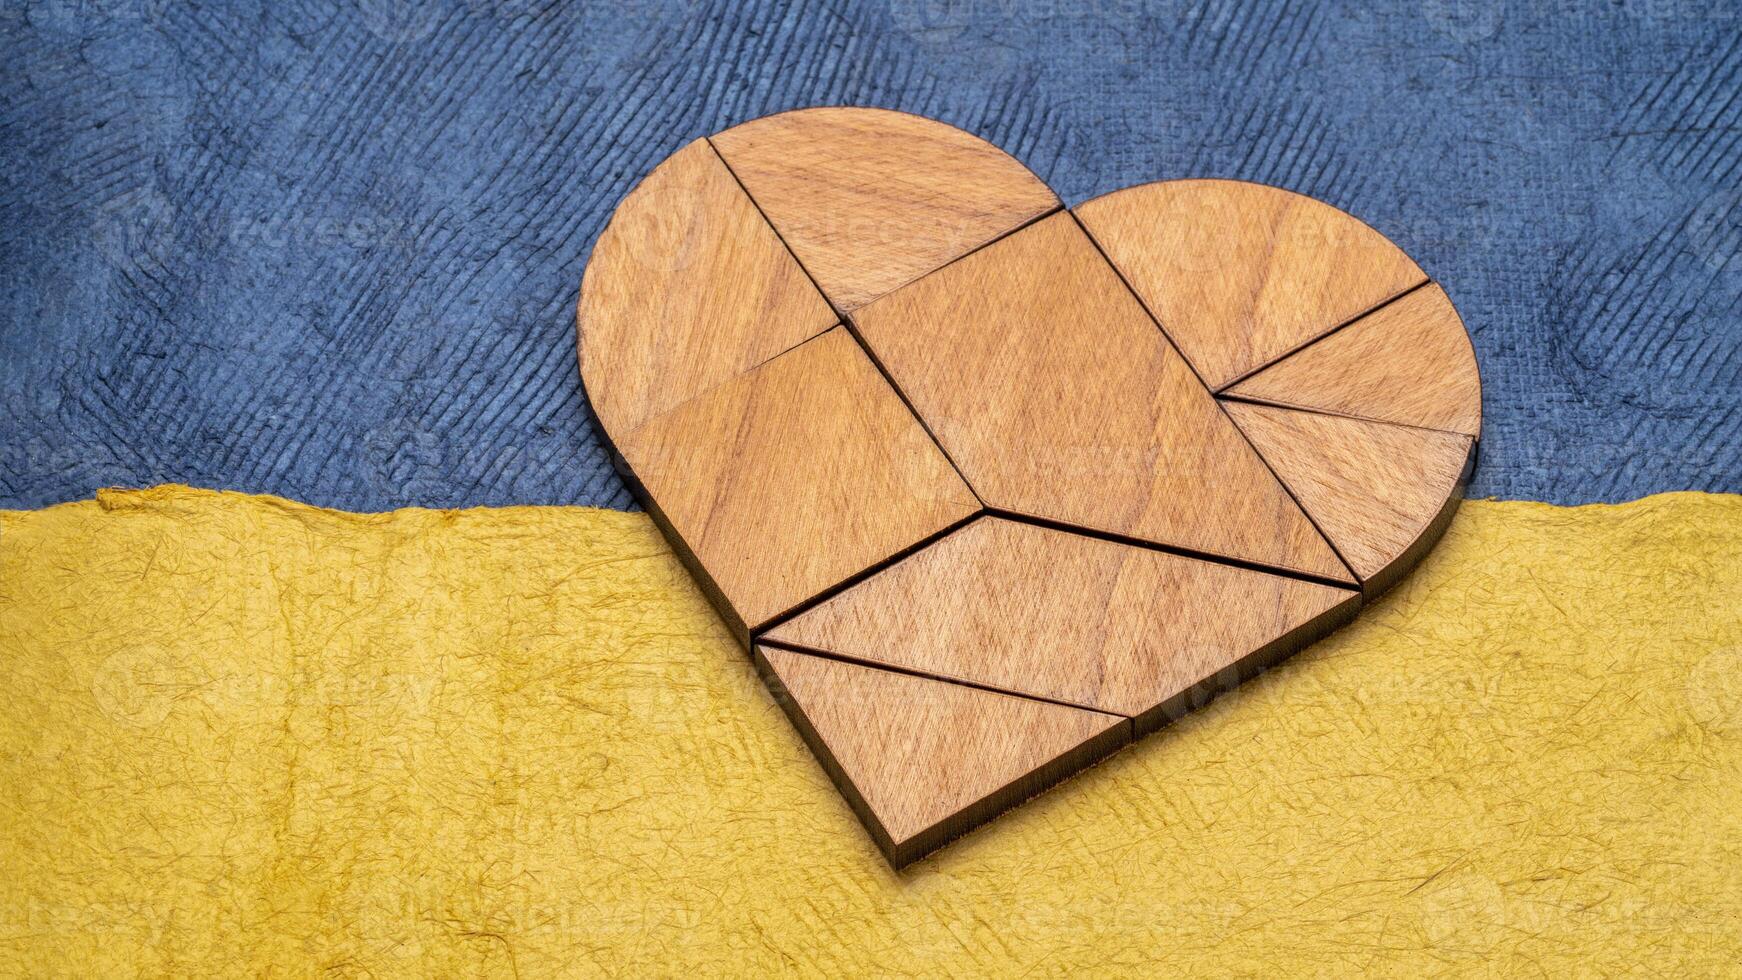 heart tangram against paper abstract in blue and yellow photo